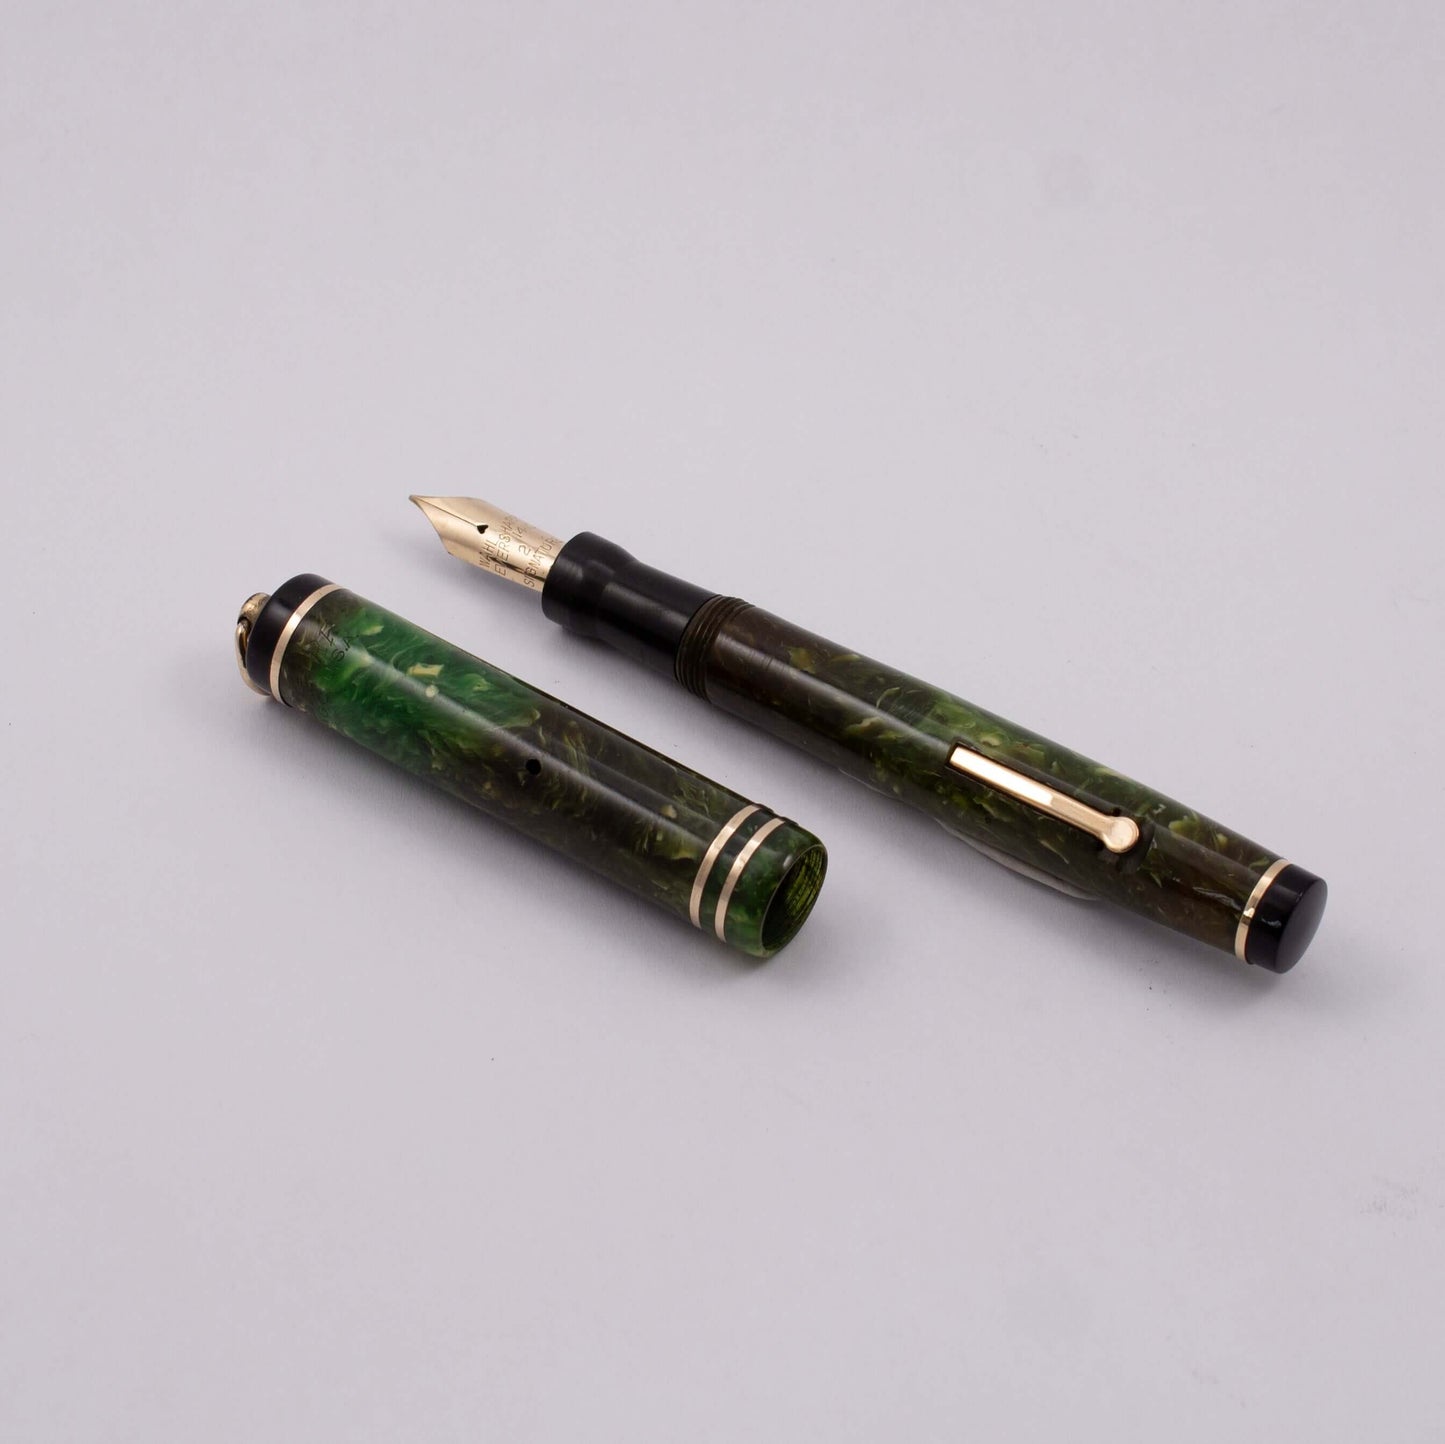 Wahl Eversharp Fountain Pen, Jade Green, Ring top, Lever Filler, 14k Gold Fine Nib Type: Restored Lever Filler Fountain Pen Product Name: Wahl Eversharp Manufacture Year: 1920's Length: 4 3/8 Filling System: Lever Filler, restored with new sac. Color/Patt